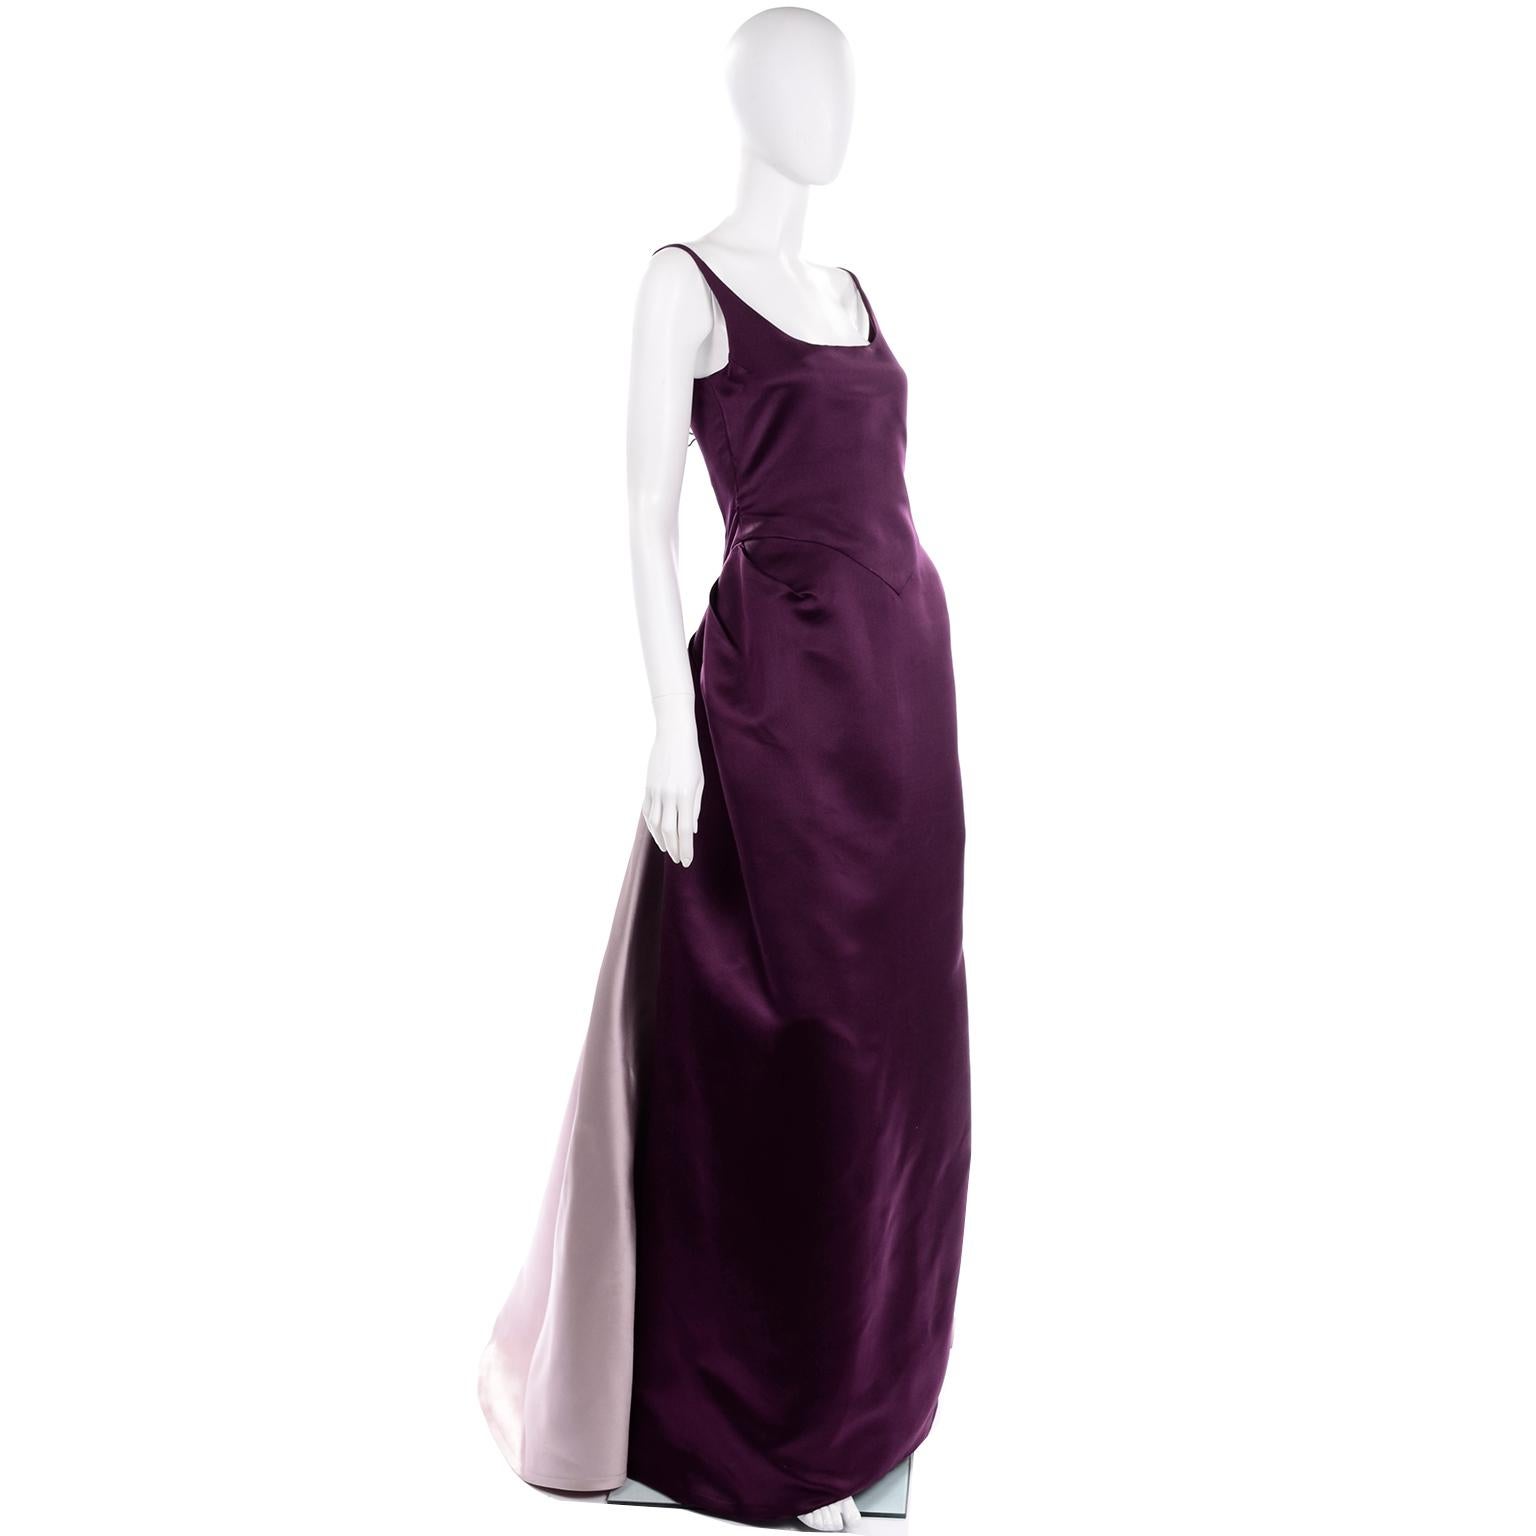 Black Vintage Bill Blass Two Toned Purple Satin Gathered Evening Dress Gown With Train